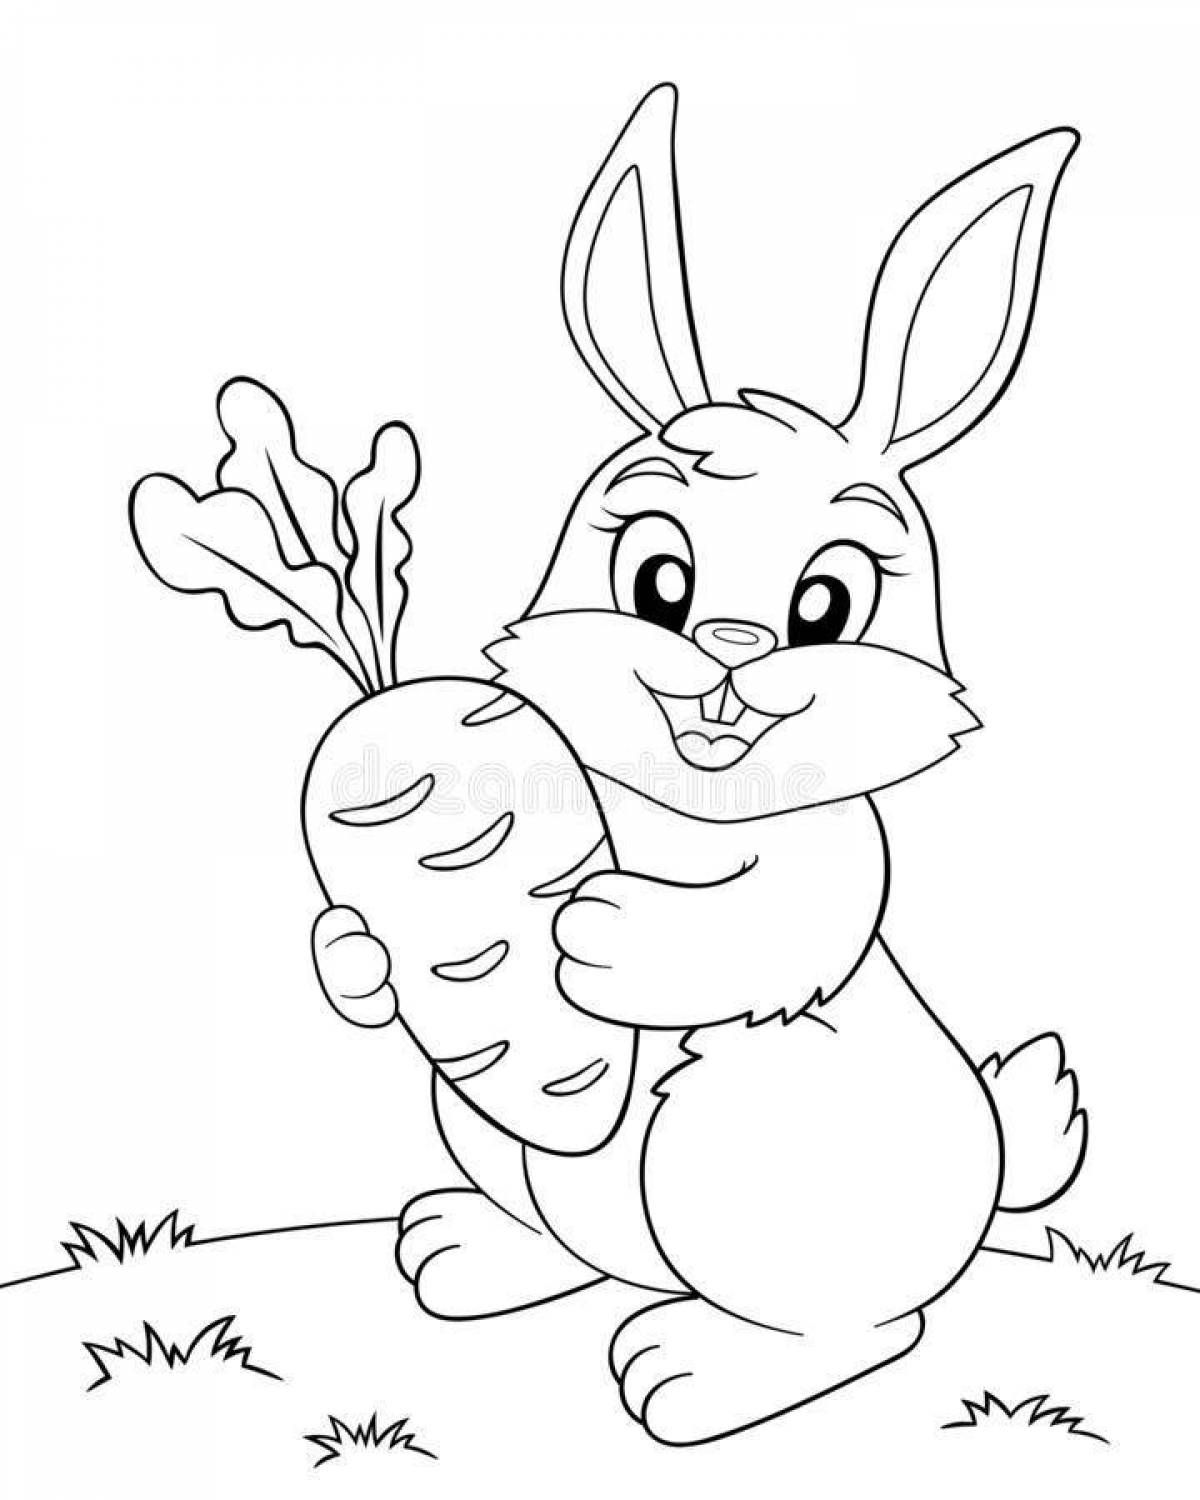 Happy coloring page bunny with carrot